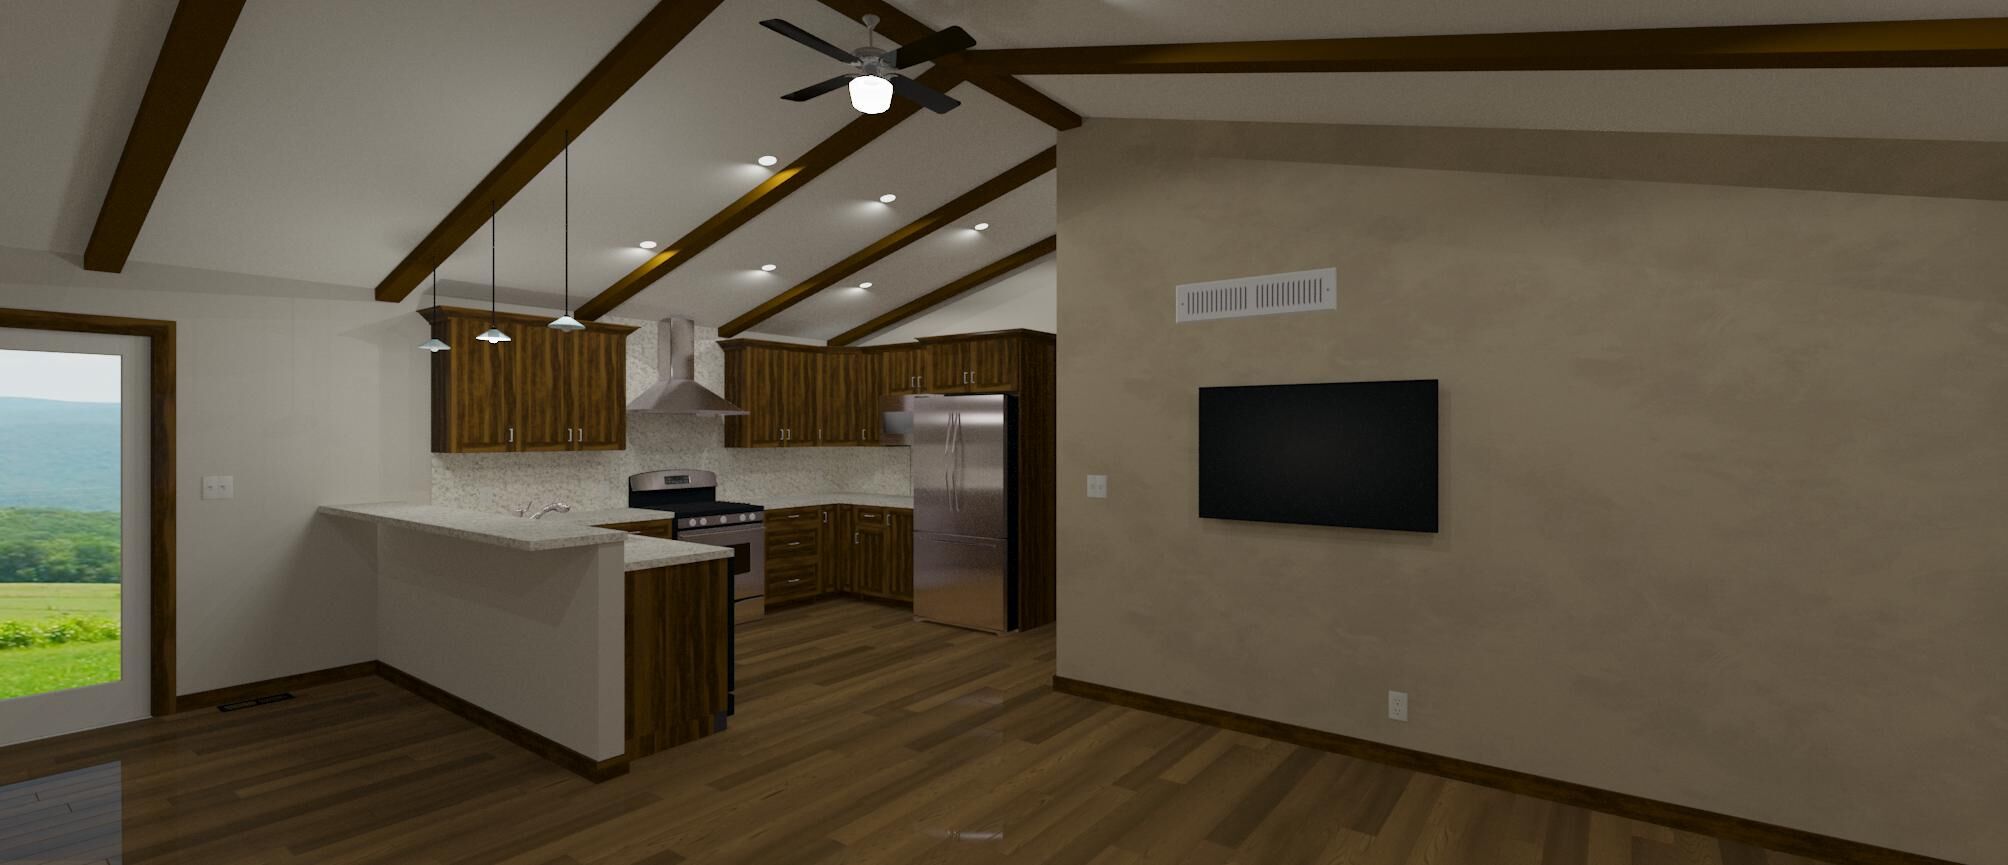  Whole Home Remodeling with Kitchen Design Trace